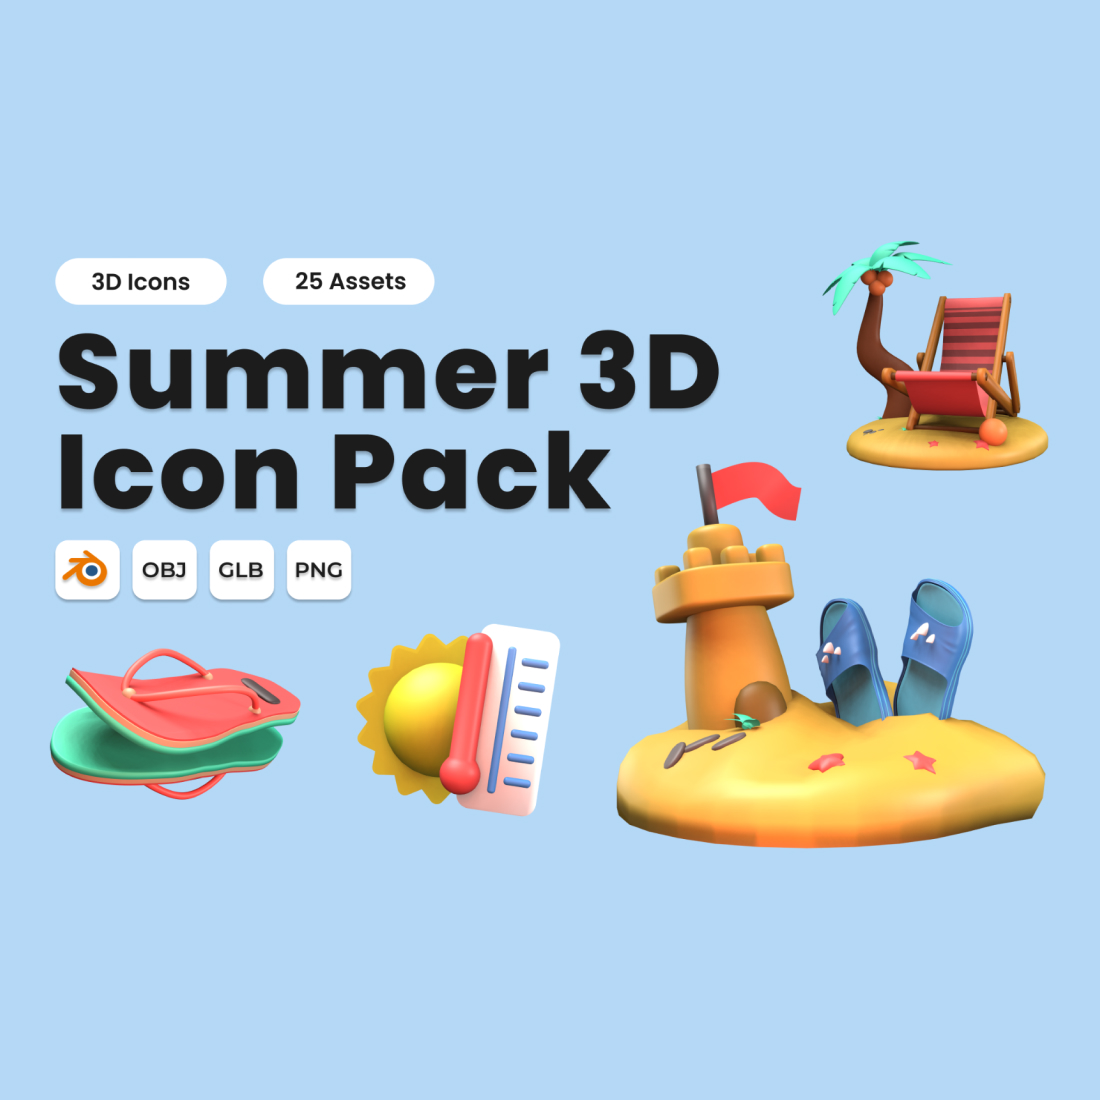 Summer 3D Icon Pack Vol 2 cover image.